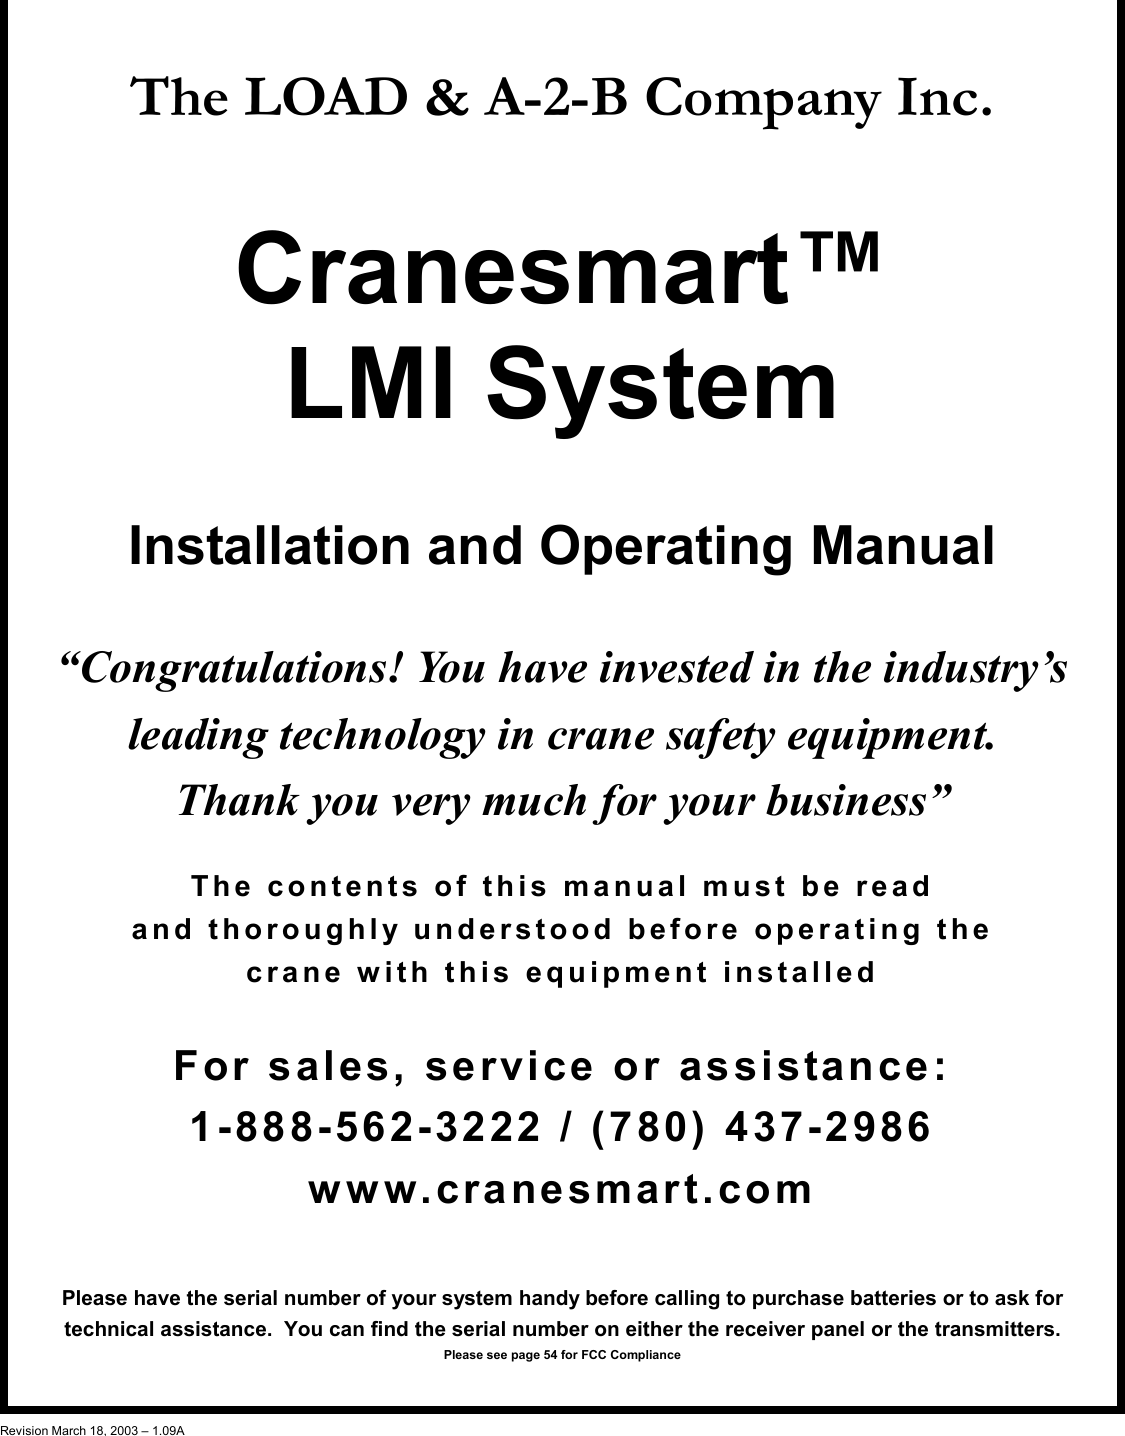 1  The LOAD &amp; A-2-B Company Inc.   Cranesmart™ LMI System  Installation and Operating Manual  “Congratulations! You have invested in the industry’s leading technology in crane safety equipment.   Thank you very much for your business”  The contents of this manual must be read  and thoroughly understood before operating the  crane with this equipment installed   For sales, service or assistance: 1-888-562-3222 / (780) 437-2986 www.cranesmart.com  Please have the serial number of your system handy before calling to purchase batteries or to ask for         technical assistance.  You can find the serial number on either the receiver panel or the transmitters. Please see page 54 for FCC Compliance   Revision March 18, 2003 – 1.09A 